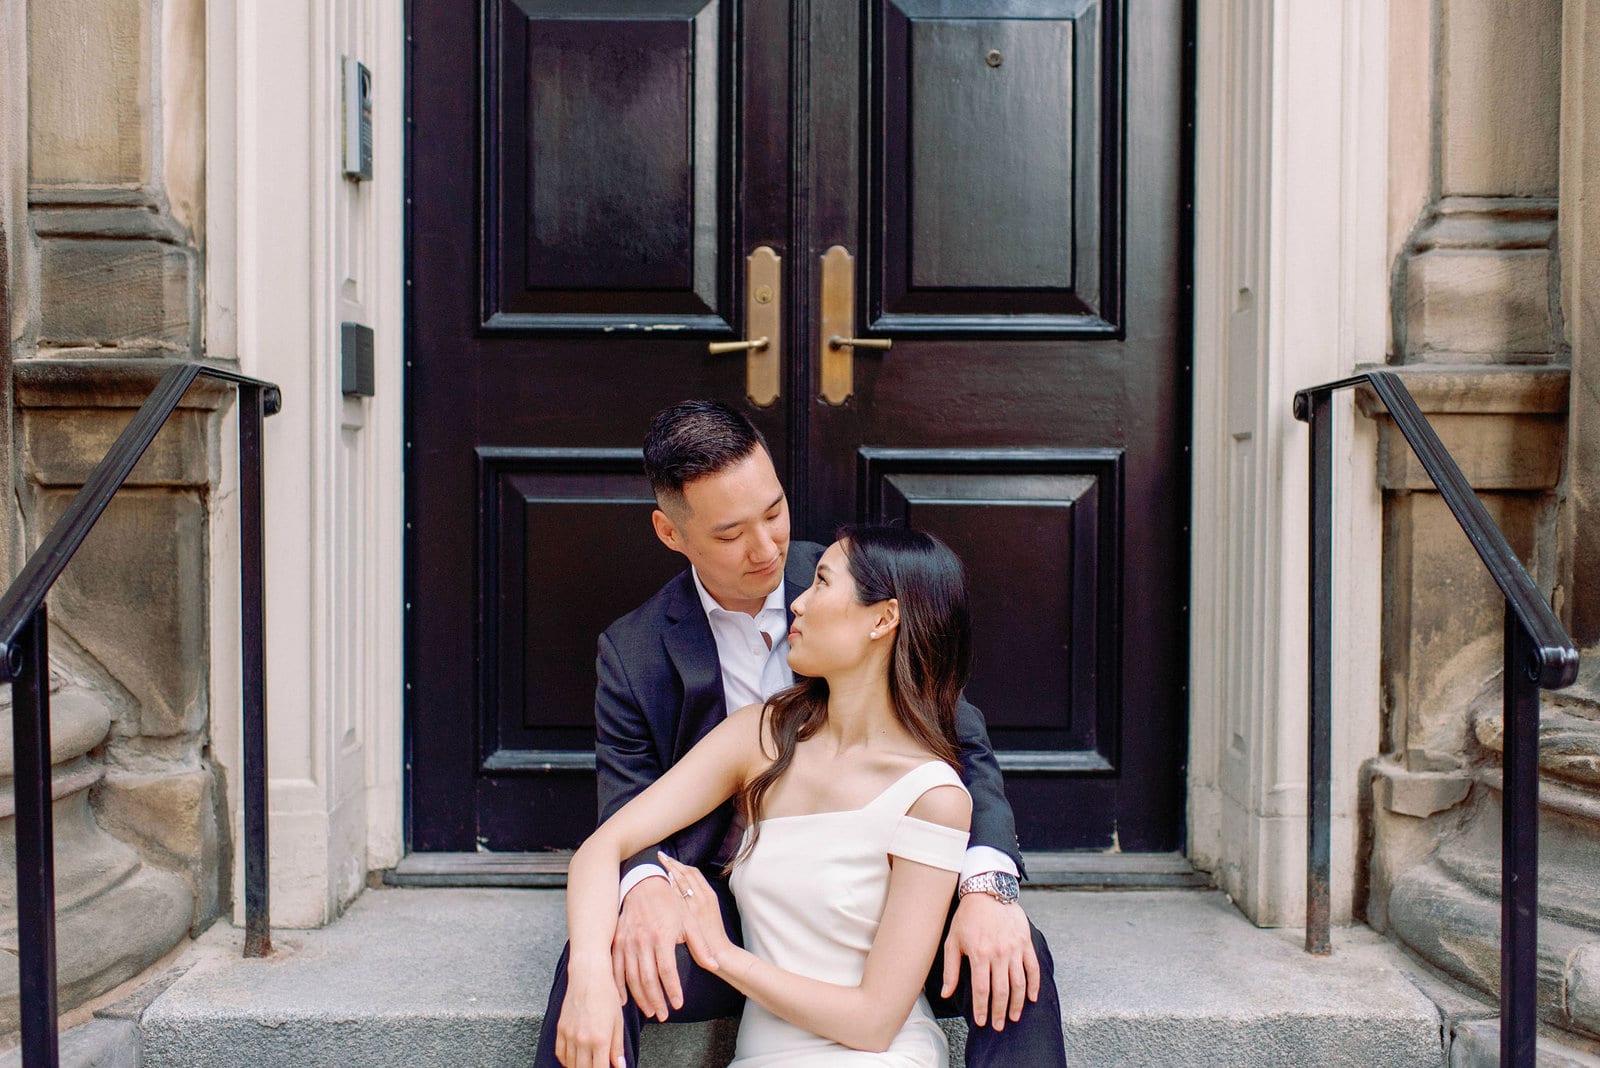 Downtown Toronto Engagement Photos Financial District Modern Editorial Timeless Couple Sitting Elegantly in Front of Beautiful Door | Toronto Wedding Photography Jacqueline James Photography